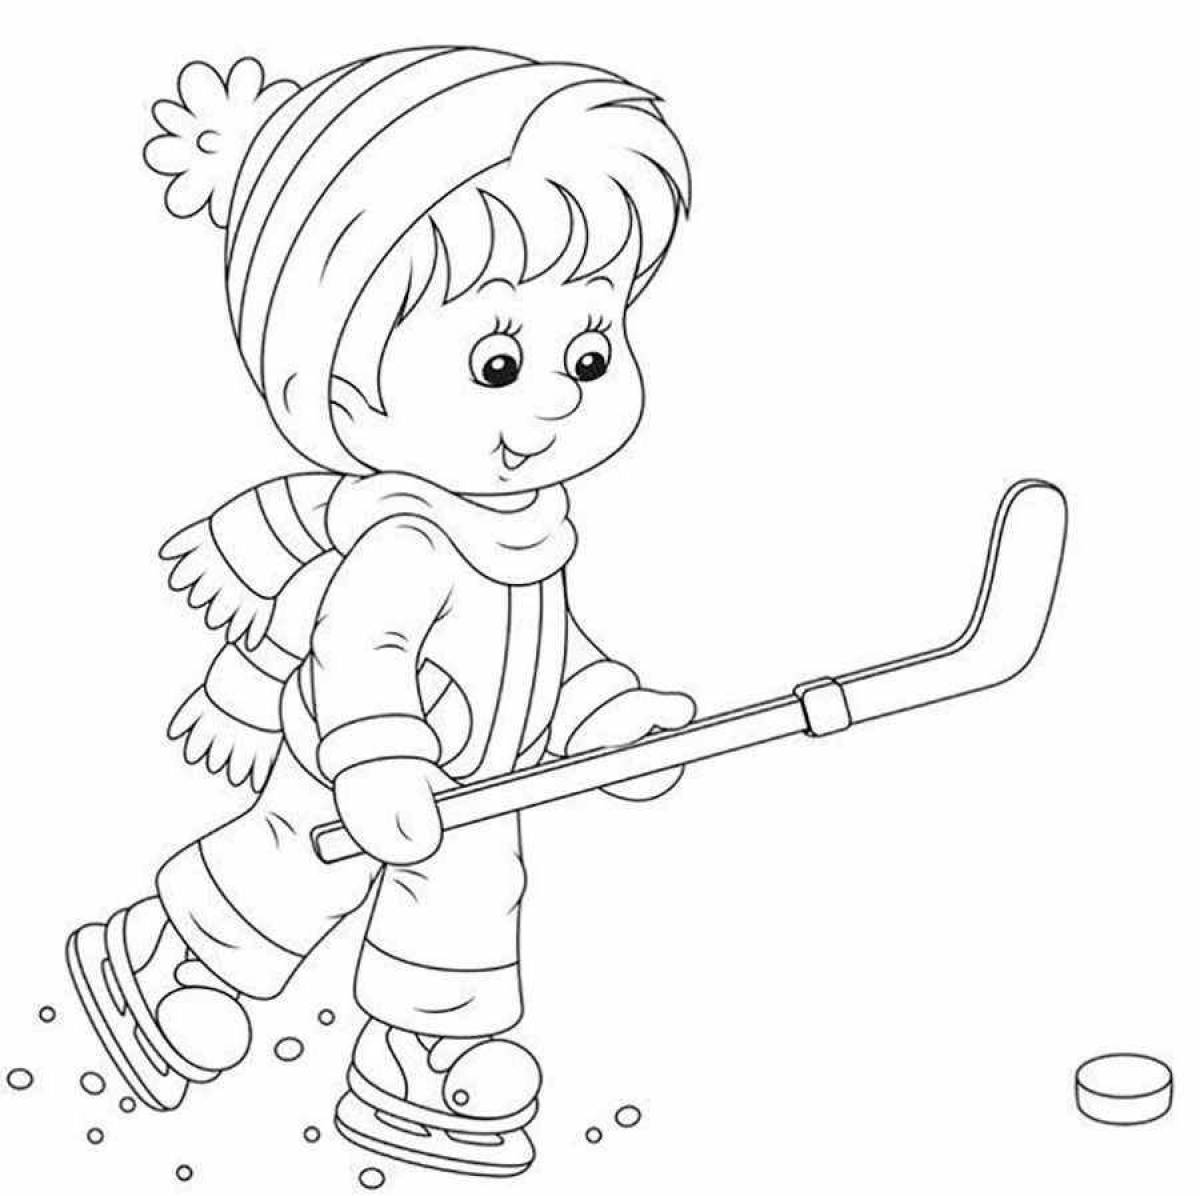 Awesome winter coloring pages for kids 5 years old